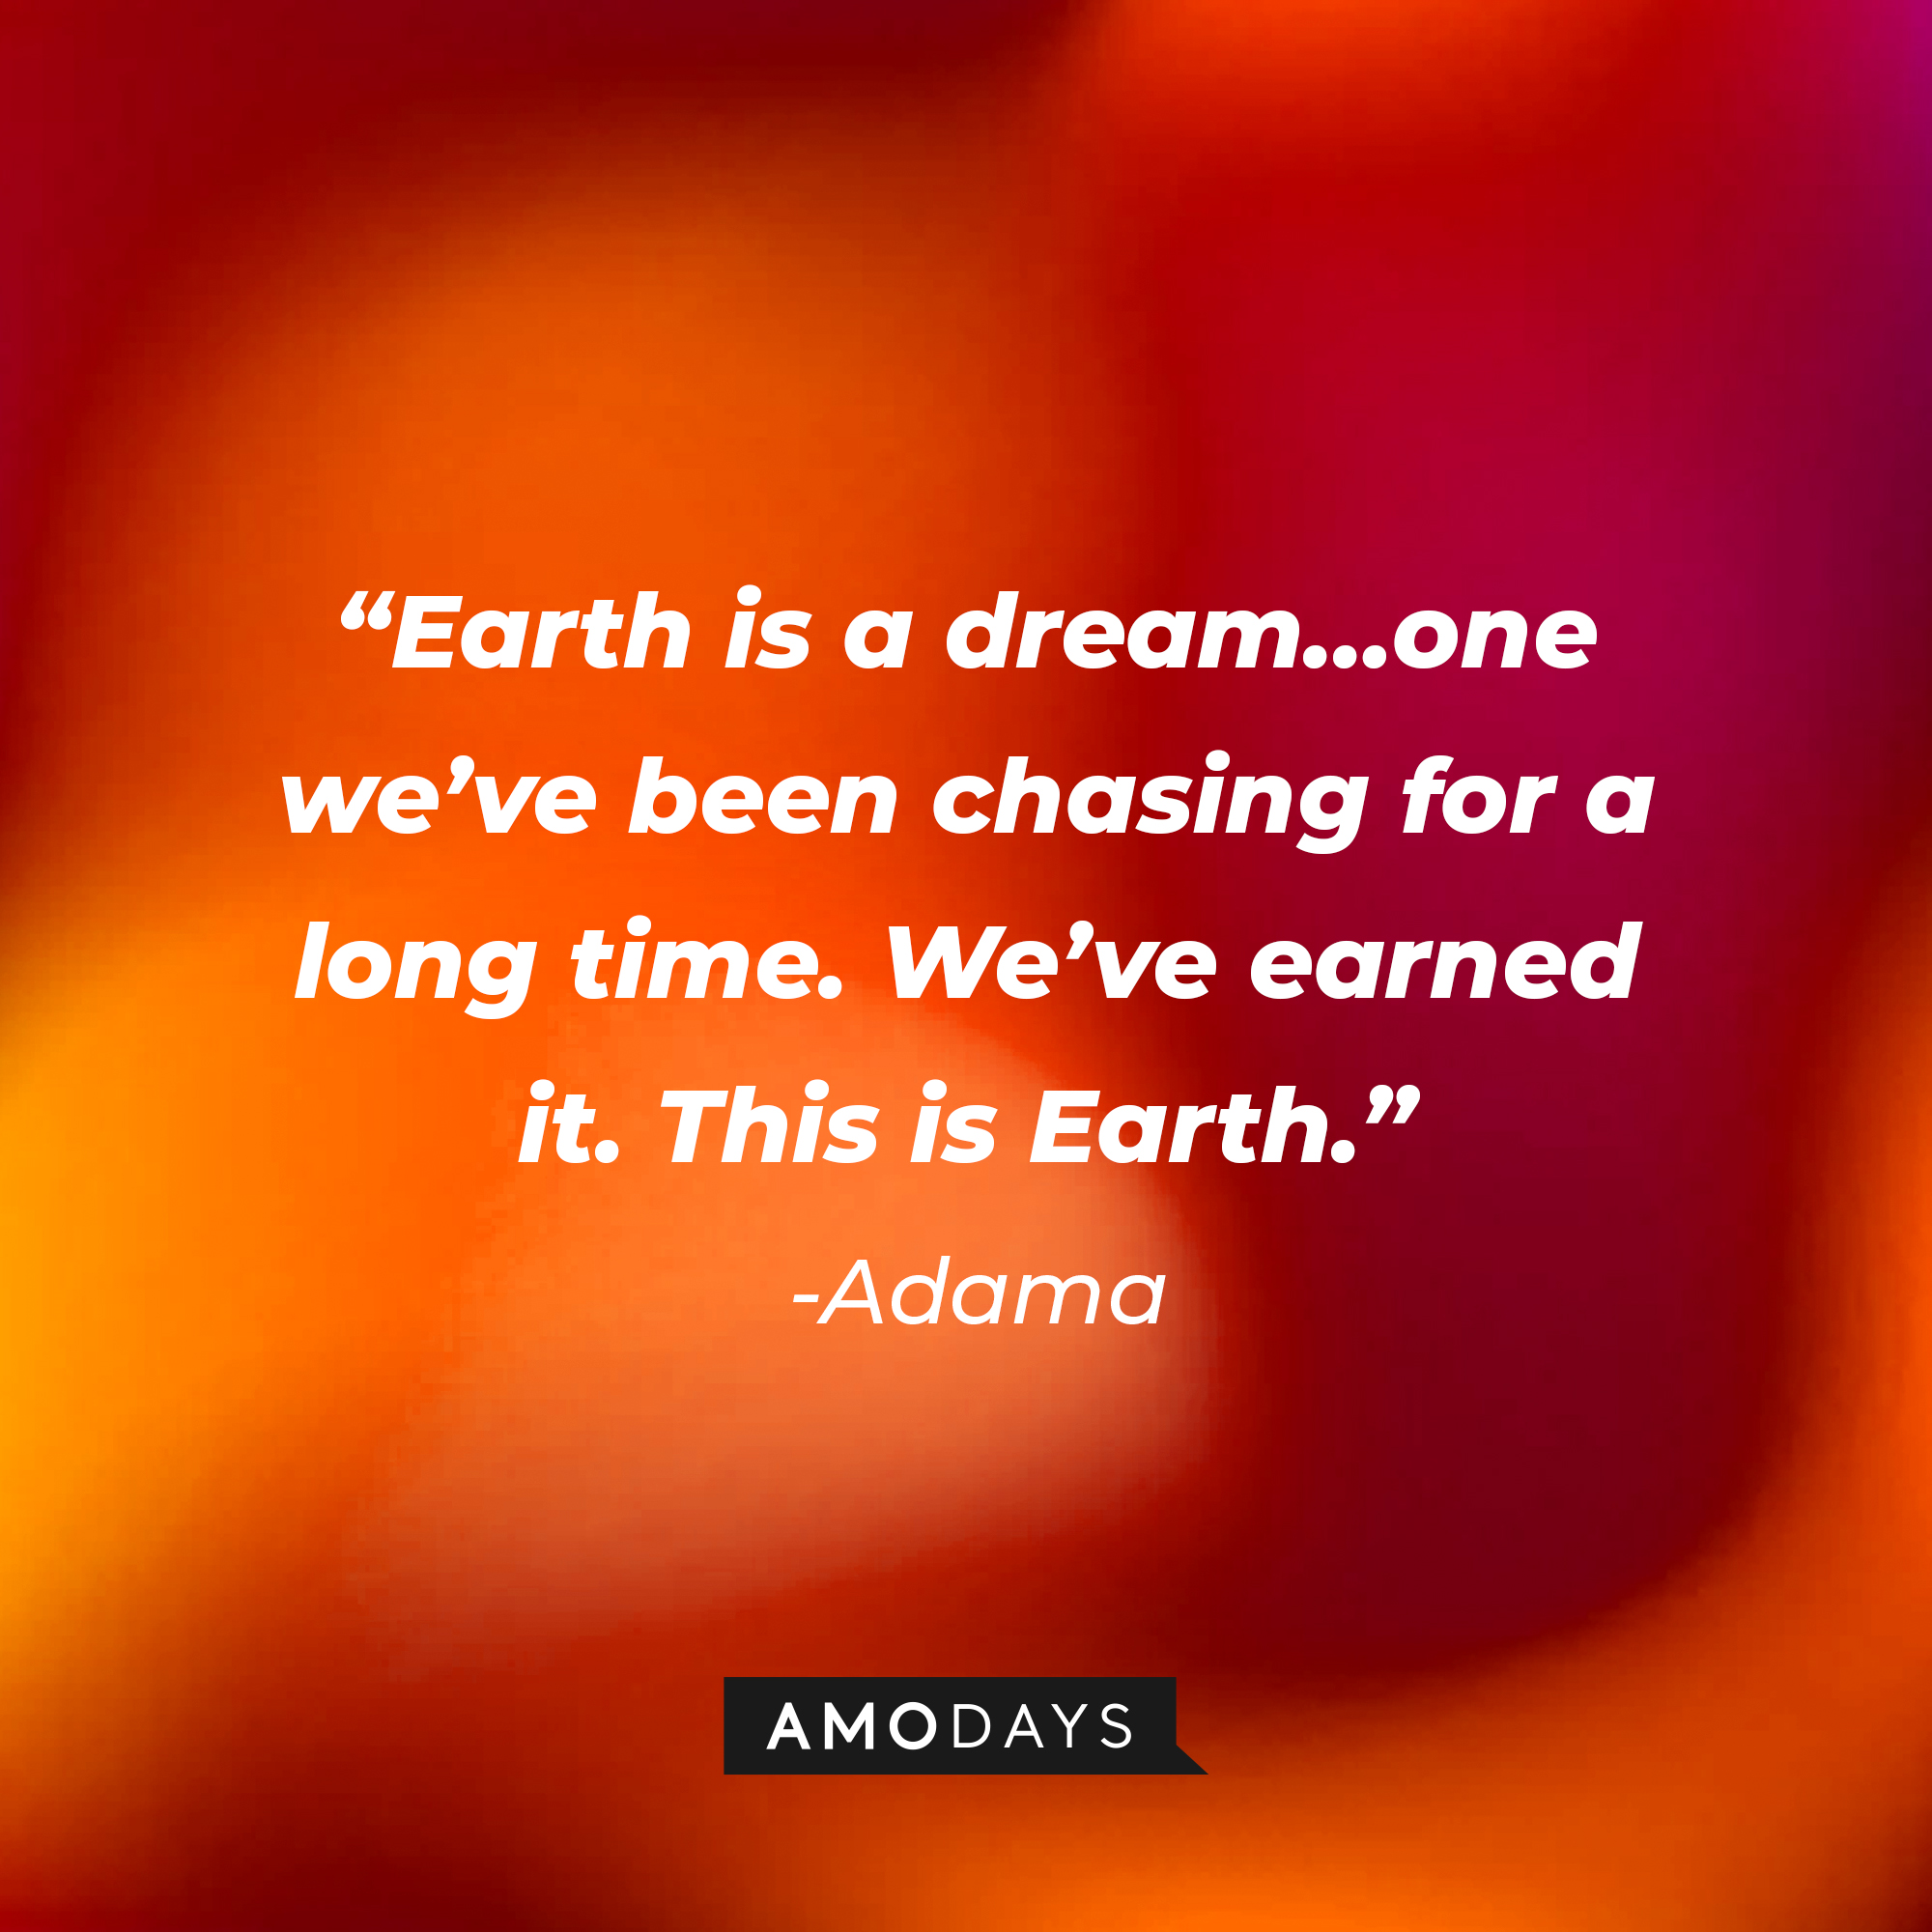 Adama’s quote: “Earth is a dream…one we’ve been chasing for a long time. We’ve earned it. This is Earth.” | Source: AmoDays